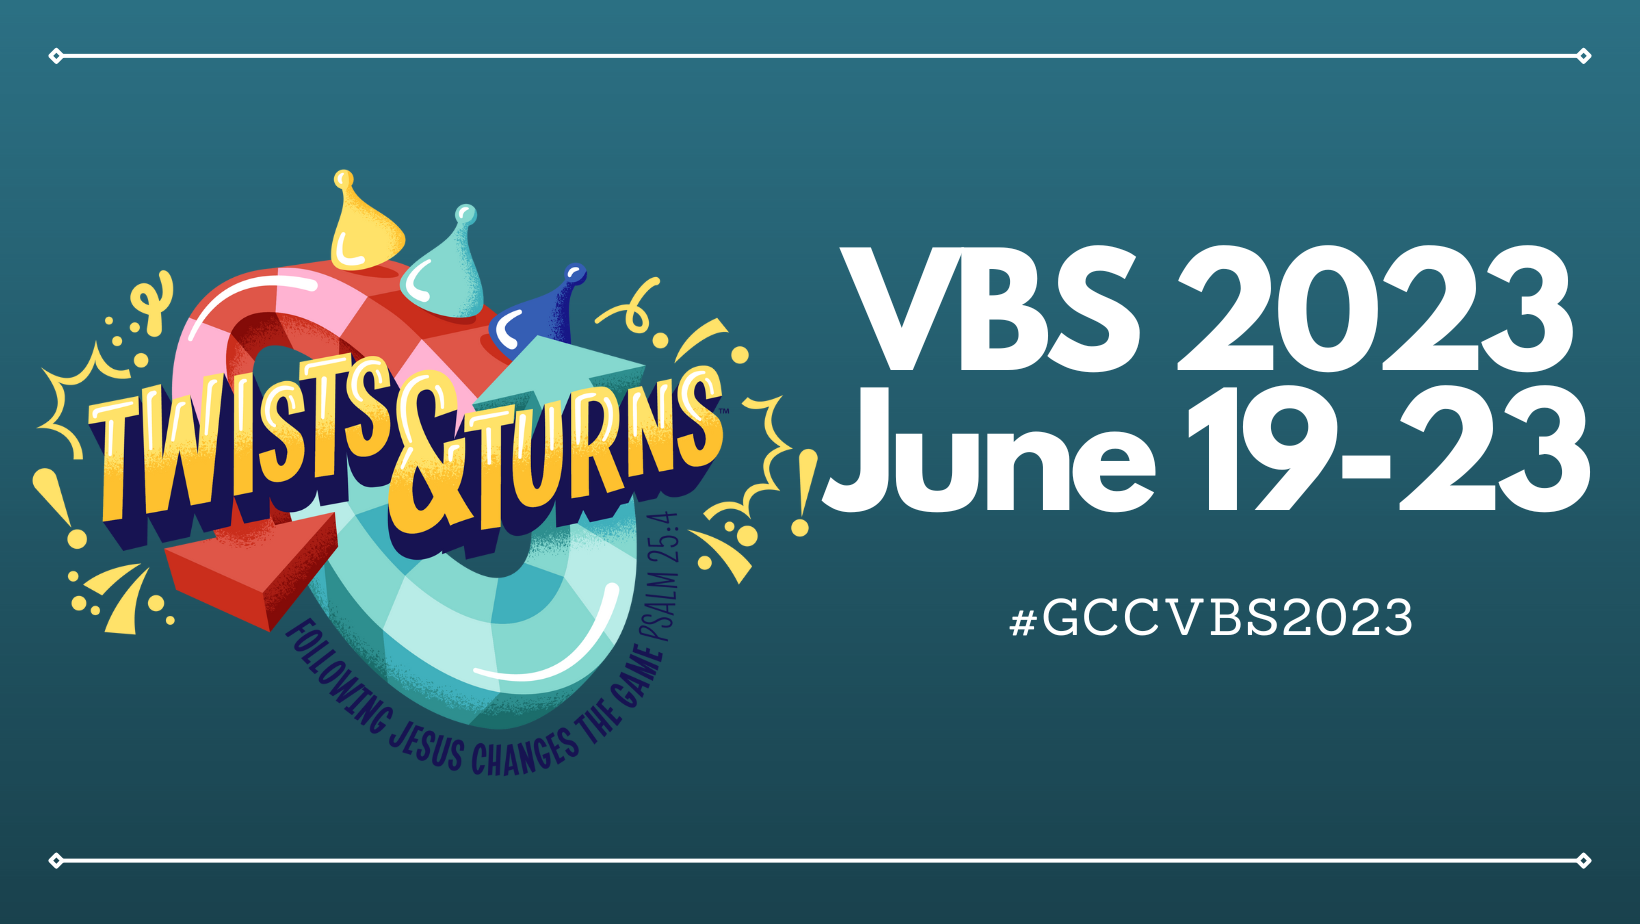 VBS 2023 June 19-23 (Facebook Cover) (1) image